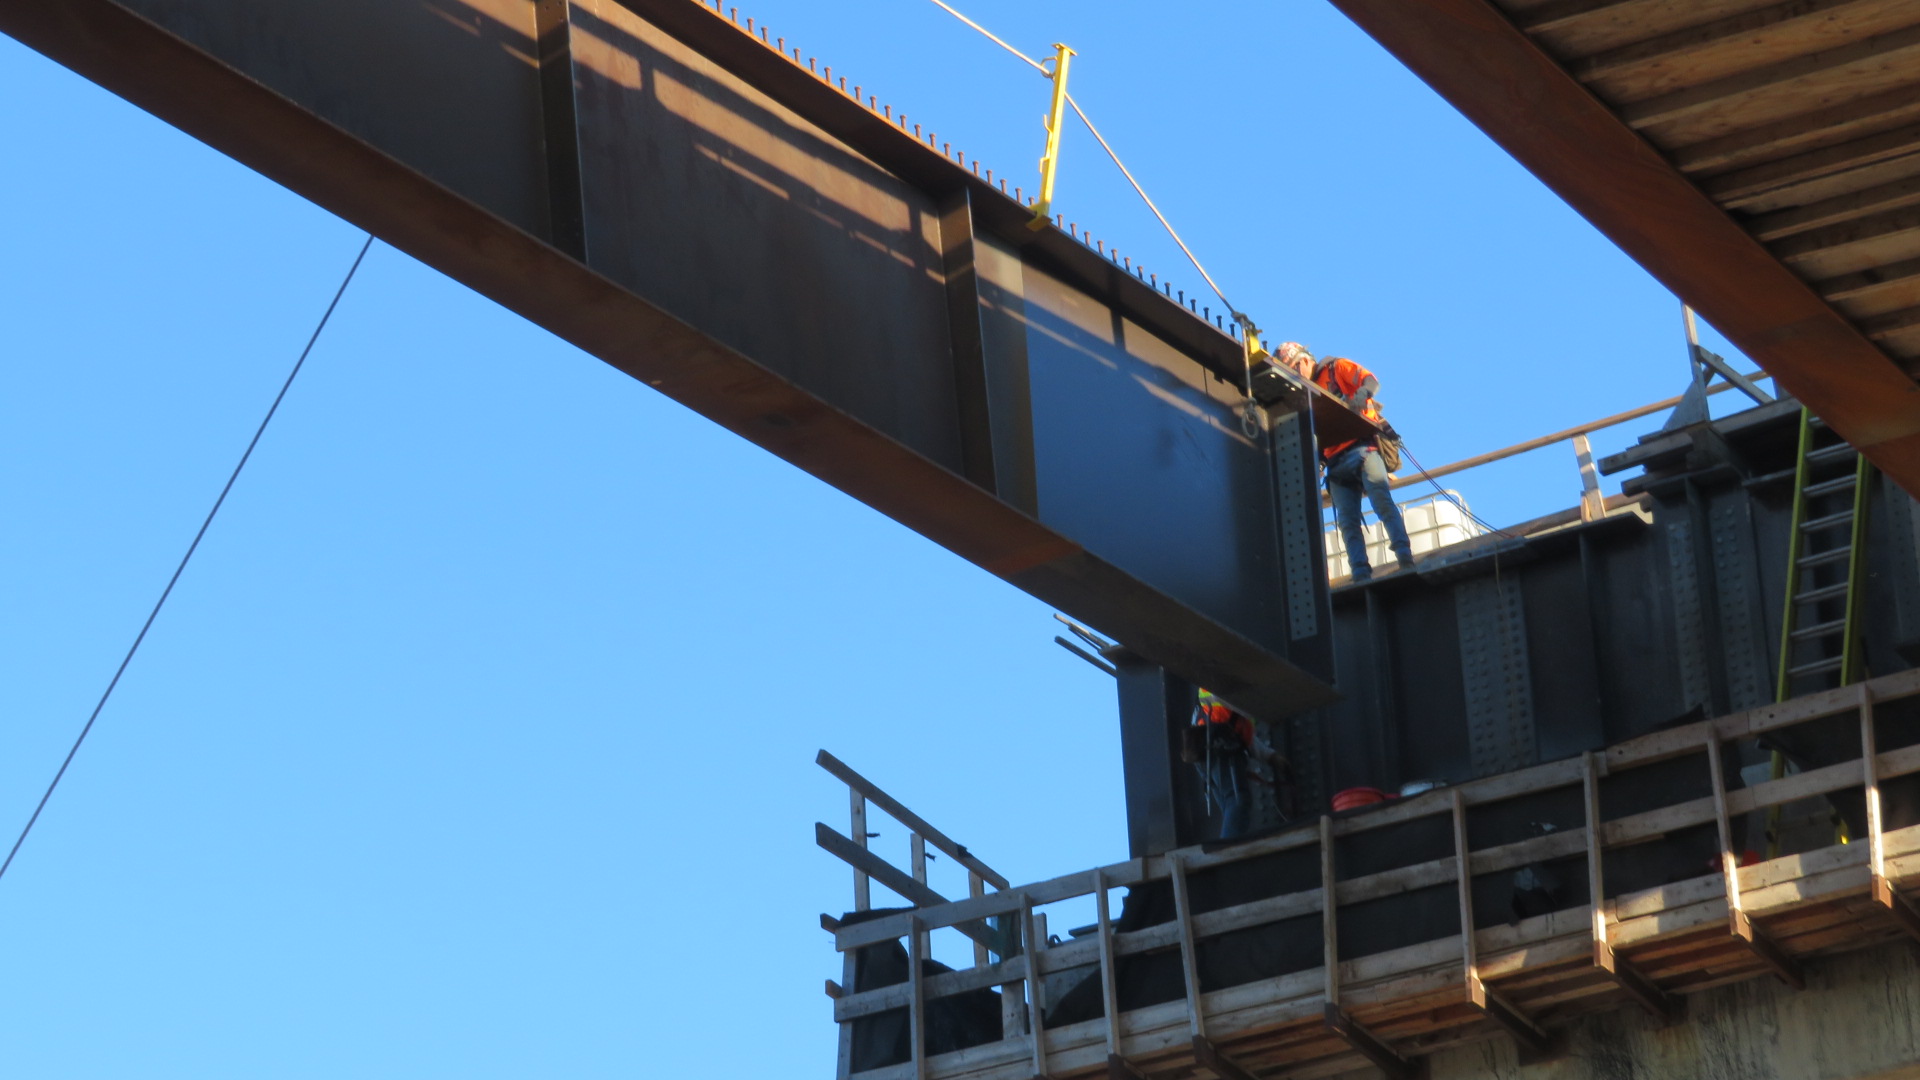 Lowering the girder into place (pier 14)